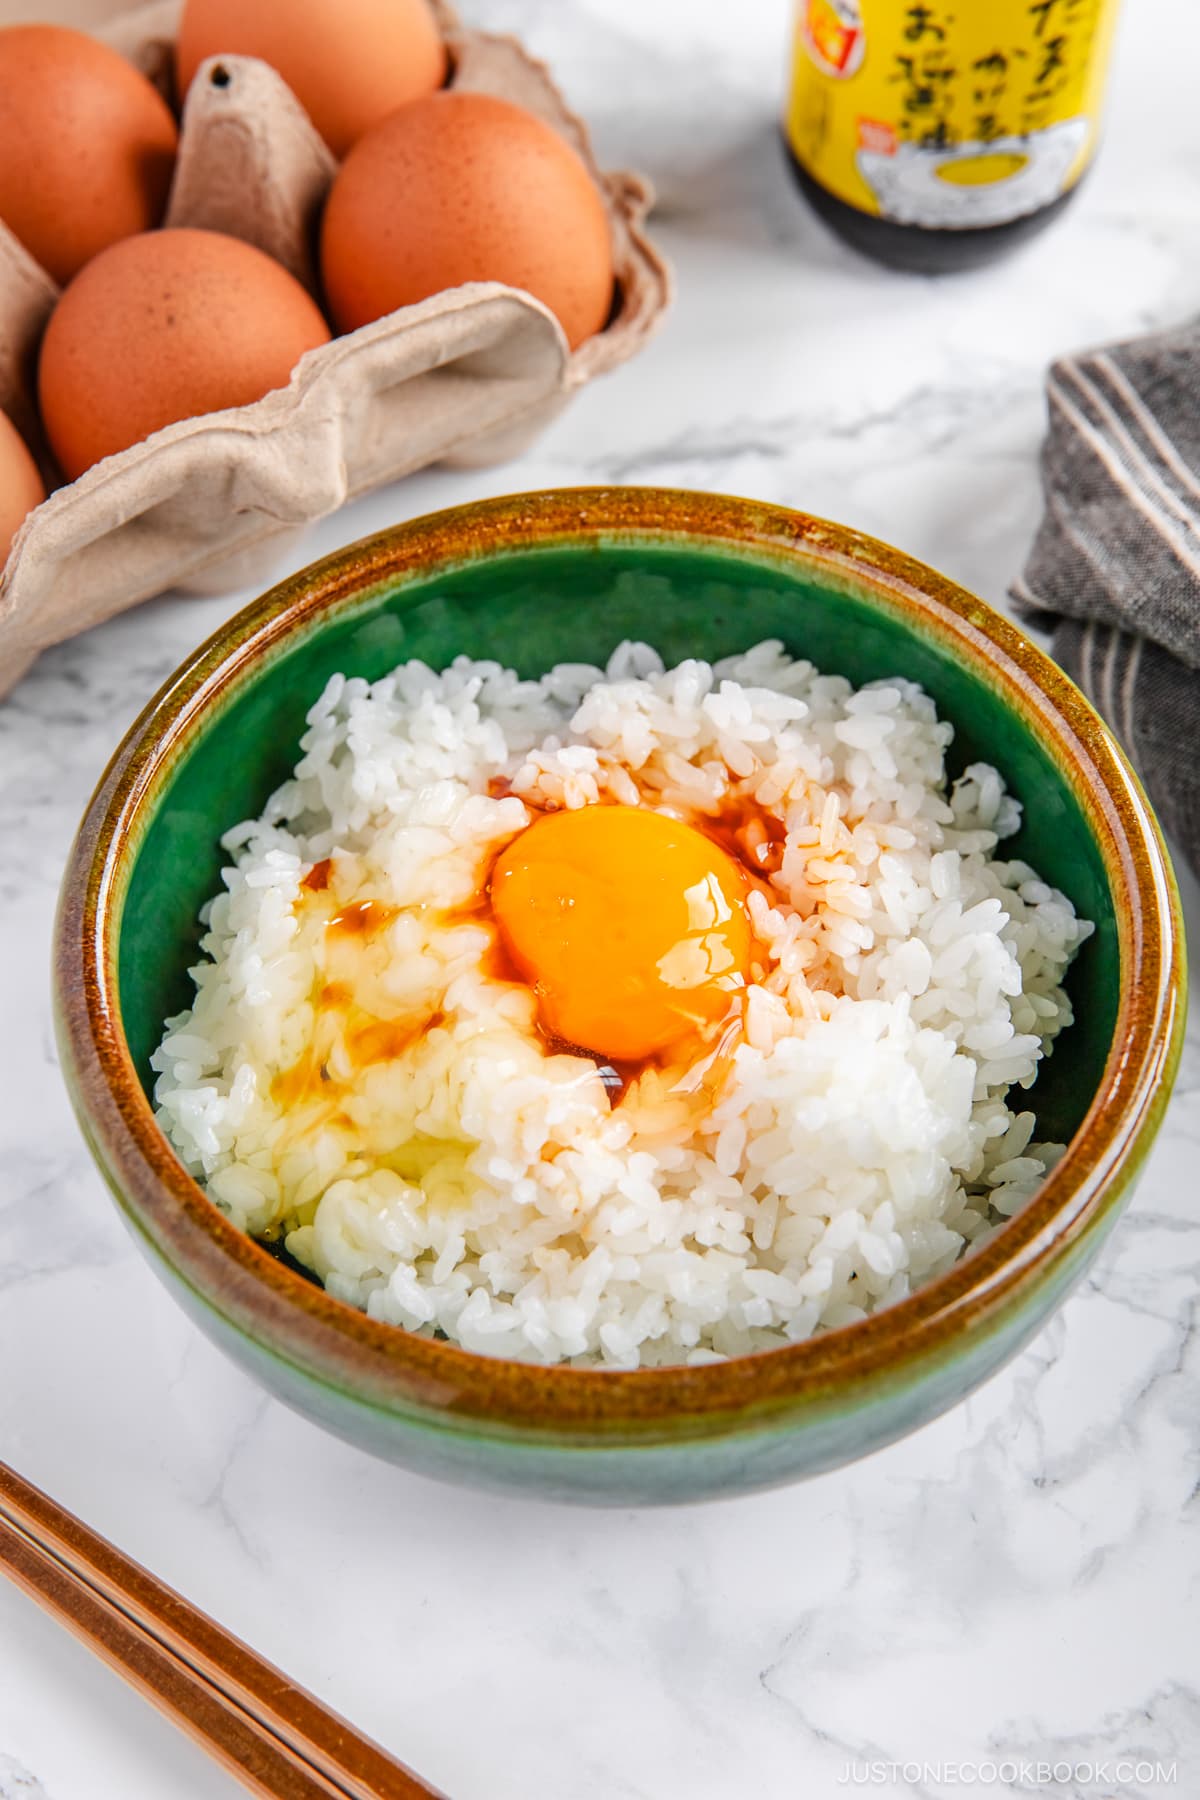 A bowl containing steamed rice, raw egg, sprinkled katsuobushi, and a drizzle of soy sauce.